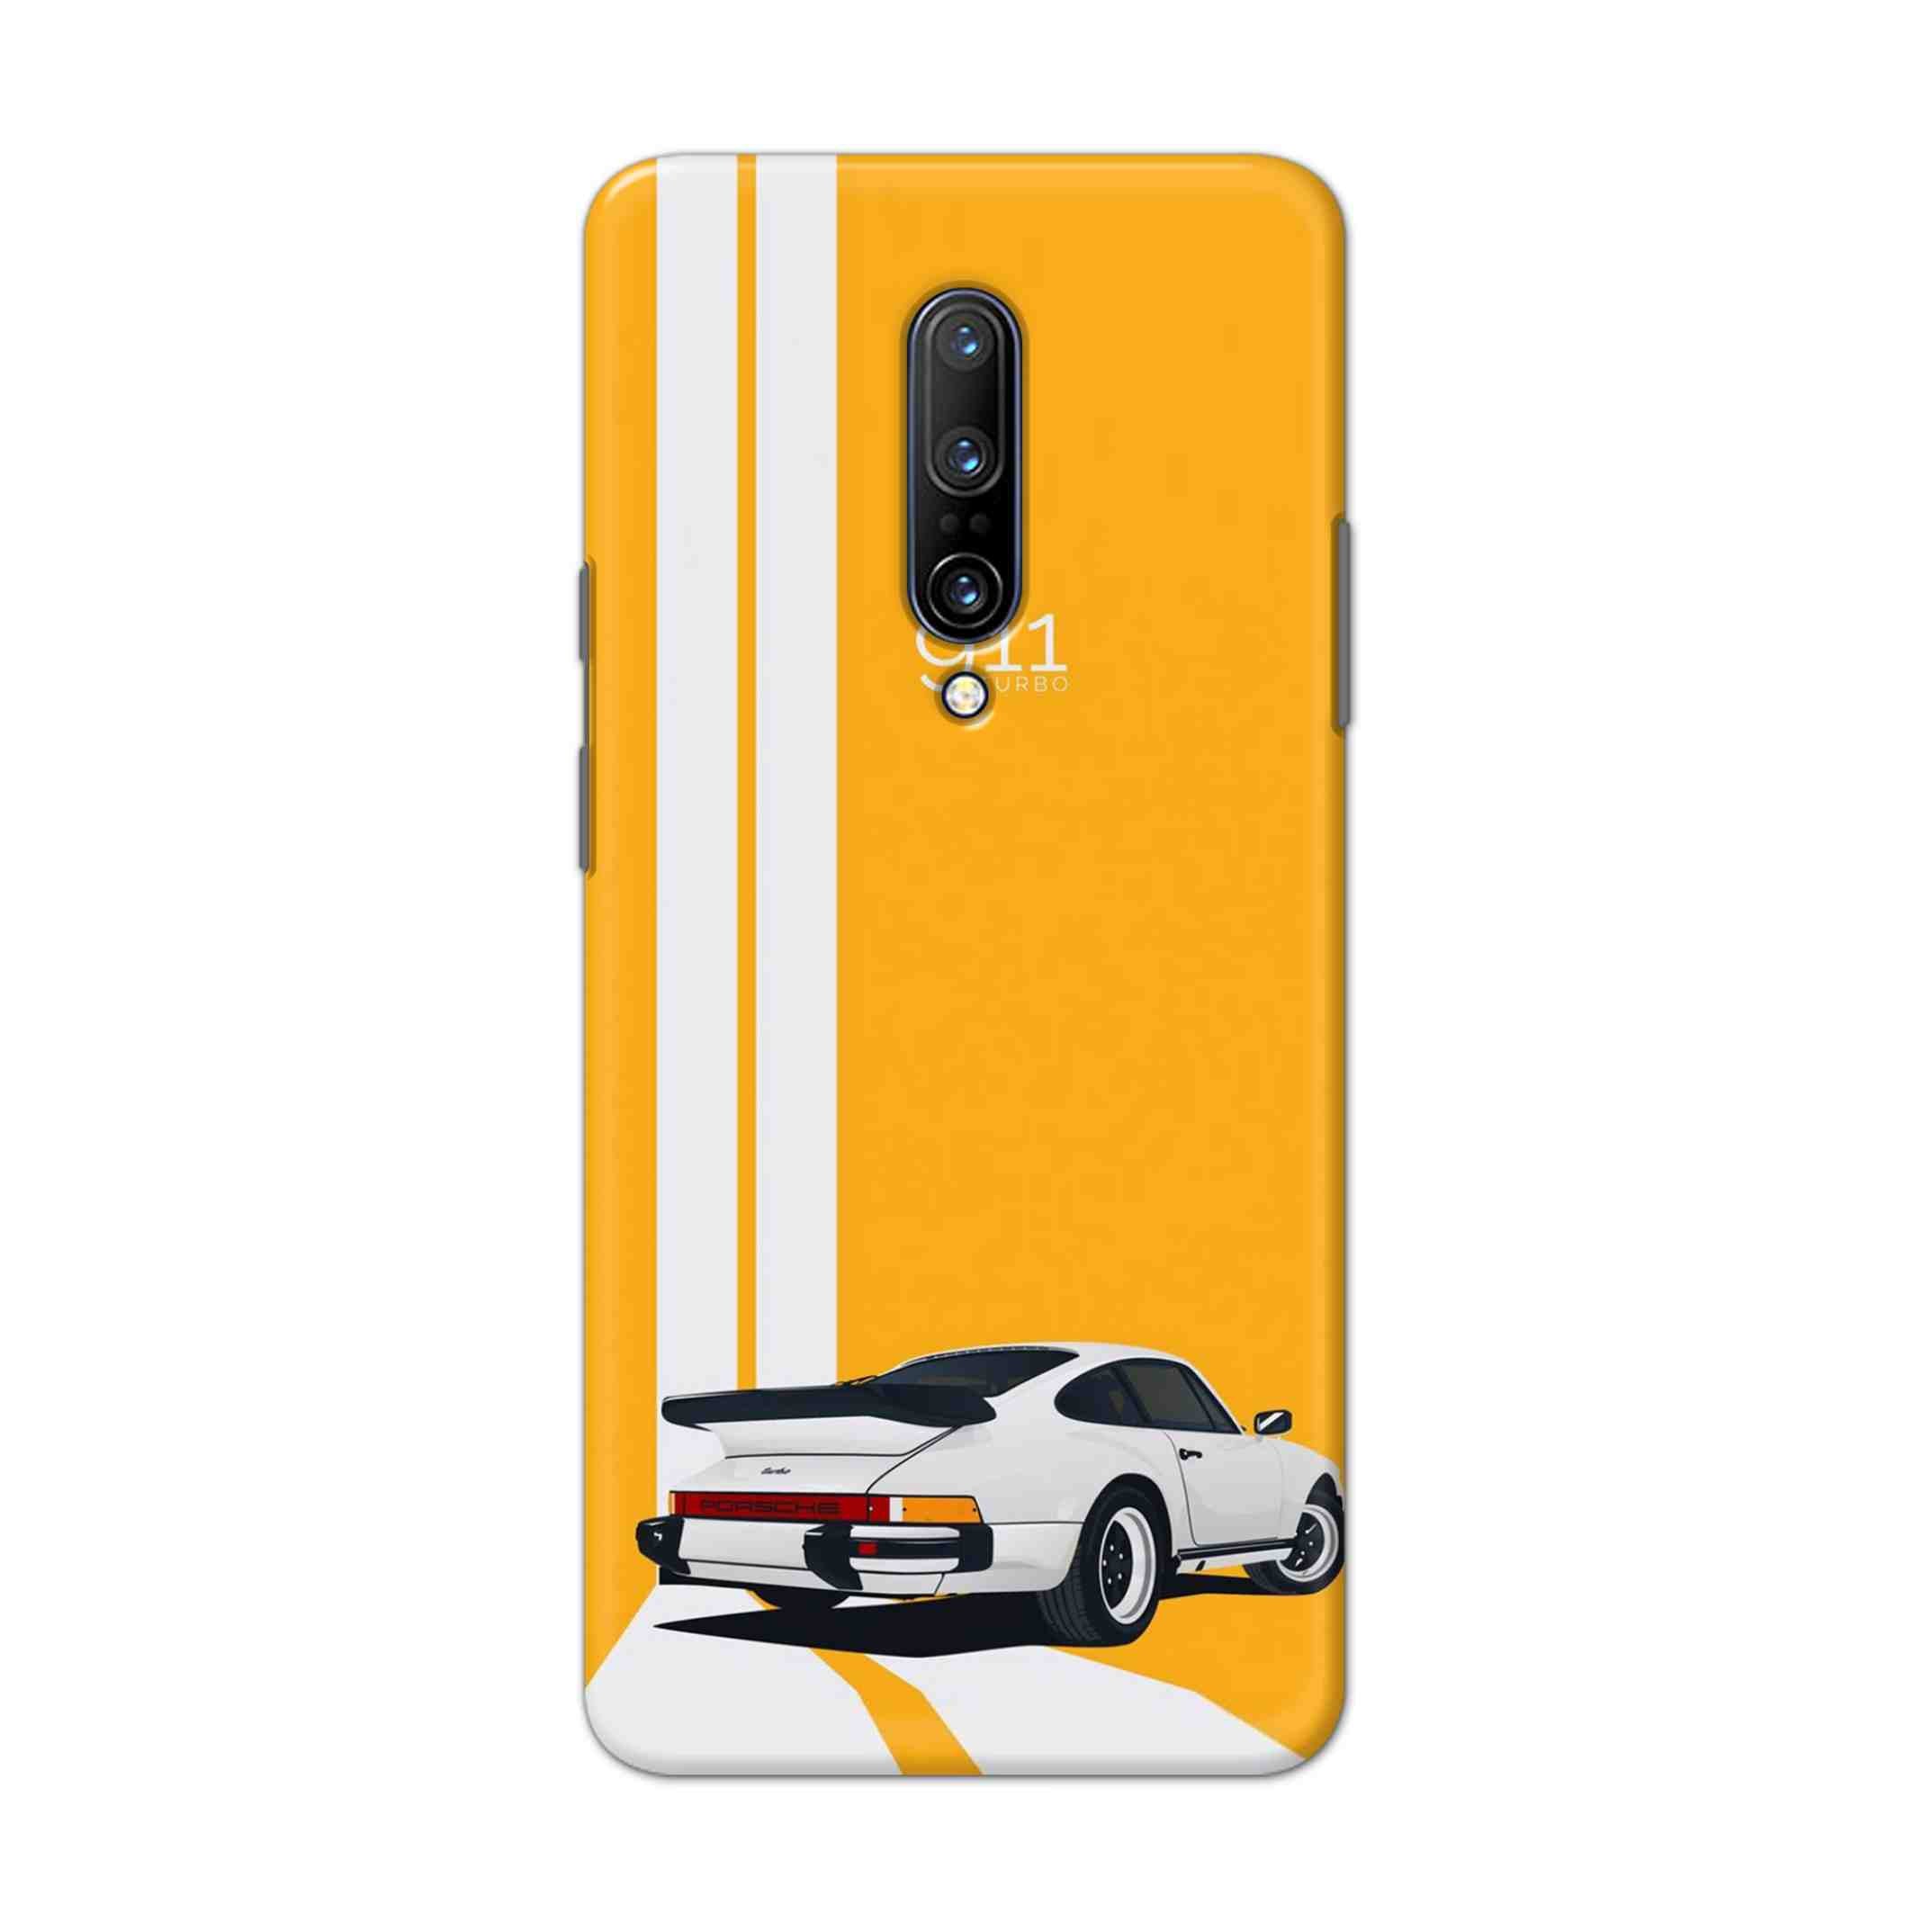 Buy 911 Gt Porche Hard Back Mobile Phone Case Cover For OnePlus 7 Pro Online